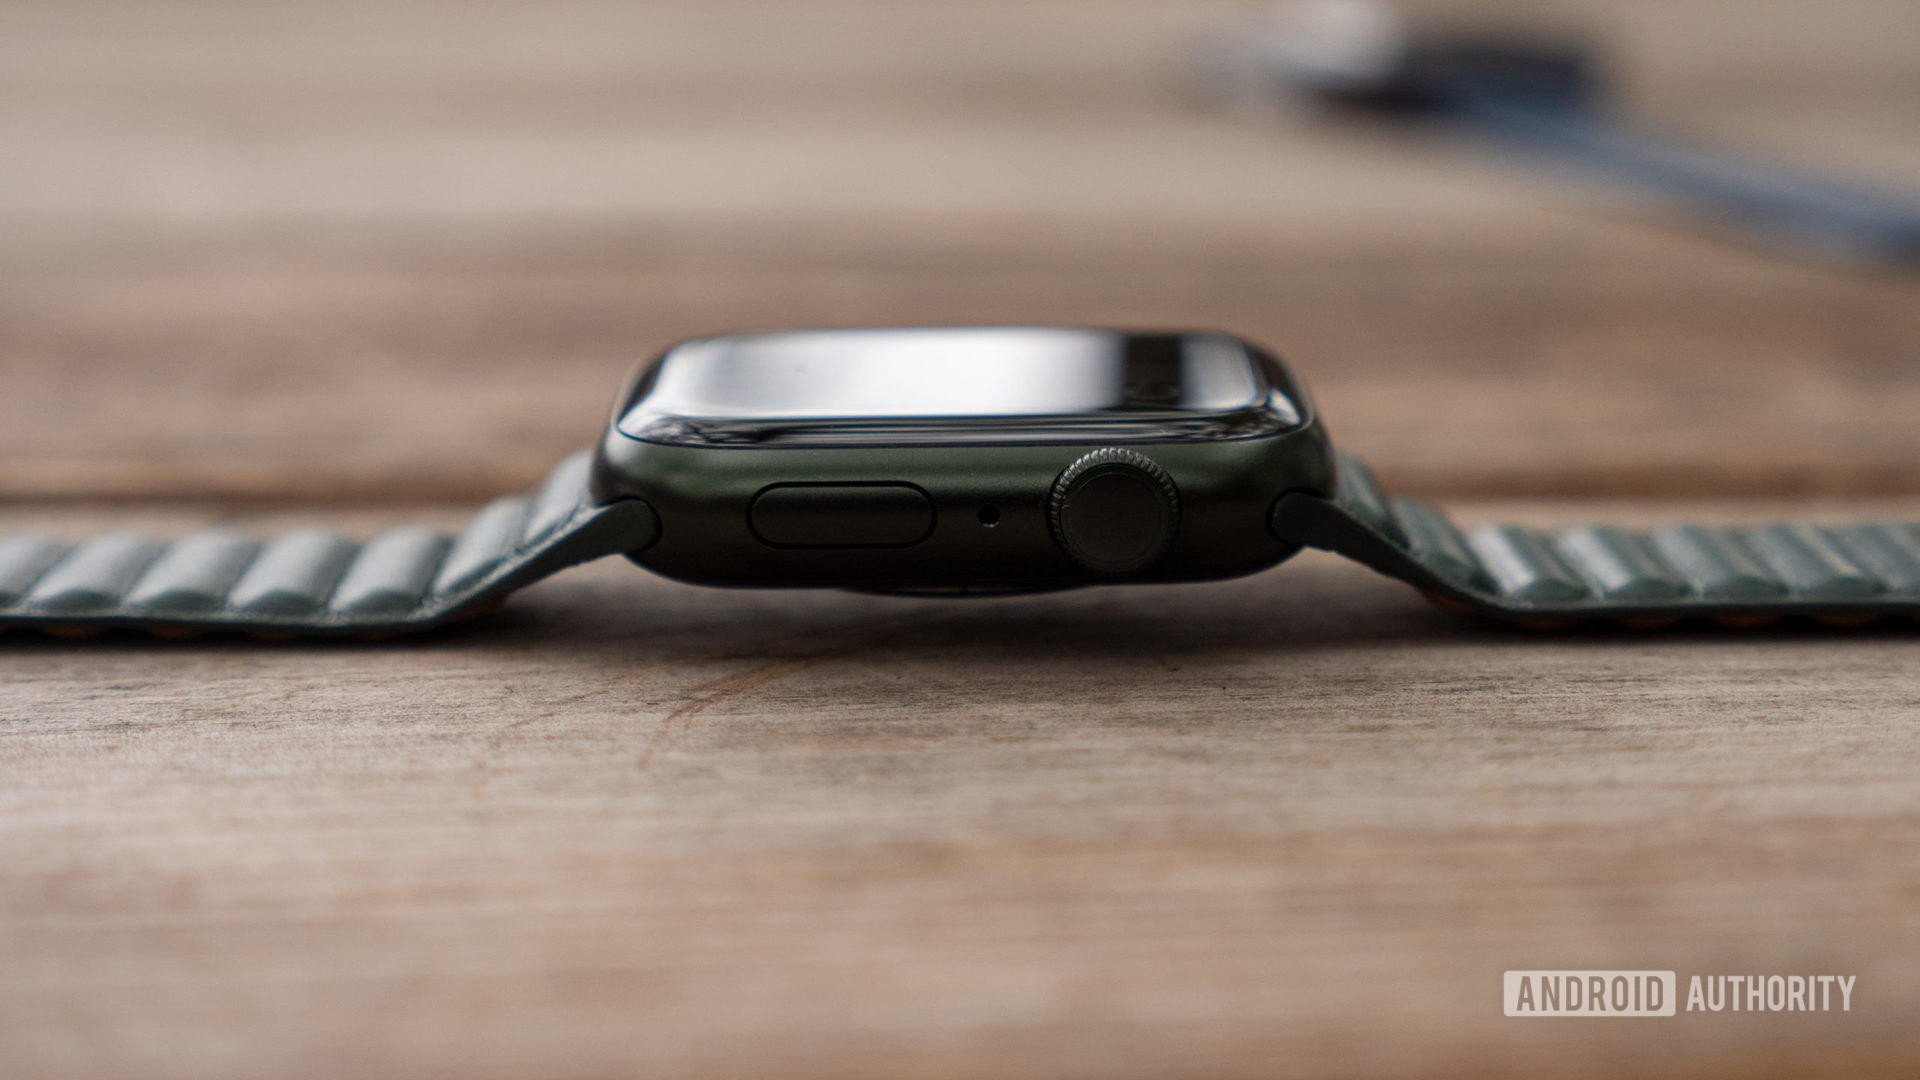 An Apple wearable rests on its side on a table, highlighting its Digital Crown.